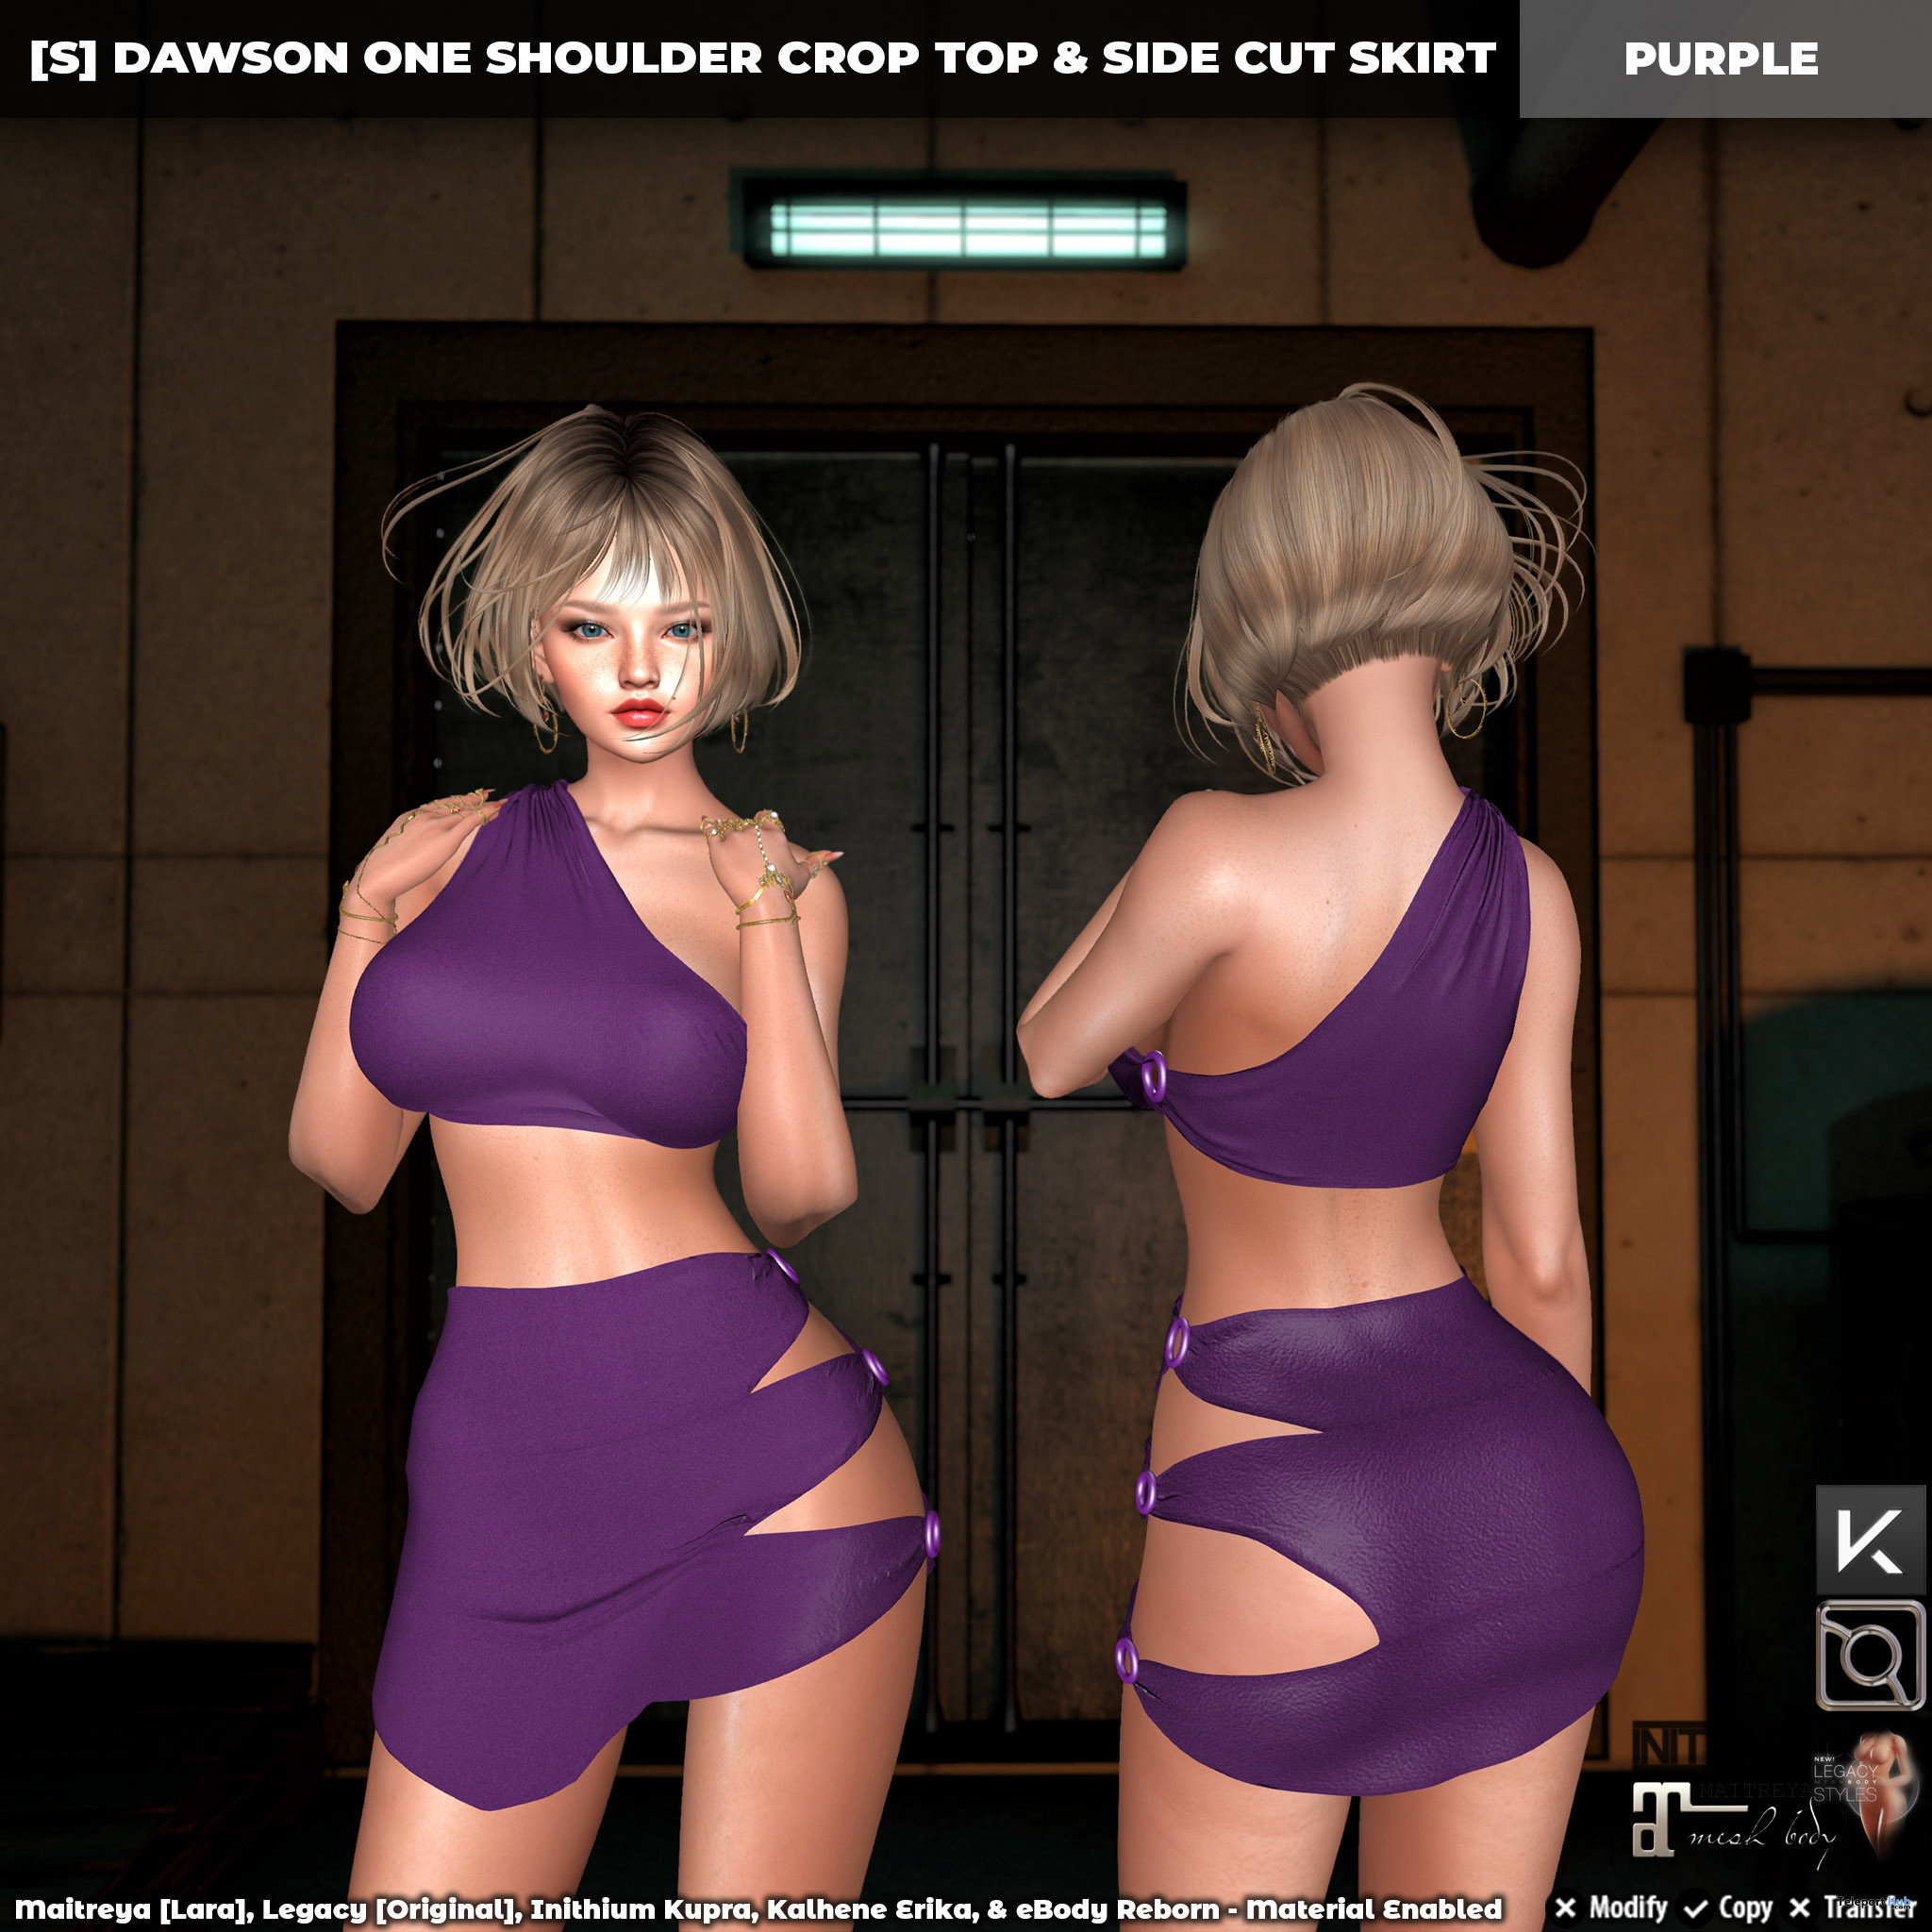 New Release: [S] Dawson One Shoulder Crop Top & Side Cut Skirt by [satus Inc] - Teleport Hub - teleporthub.com